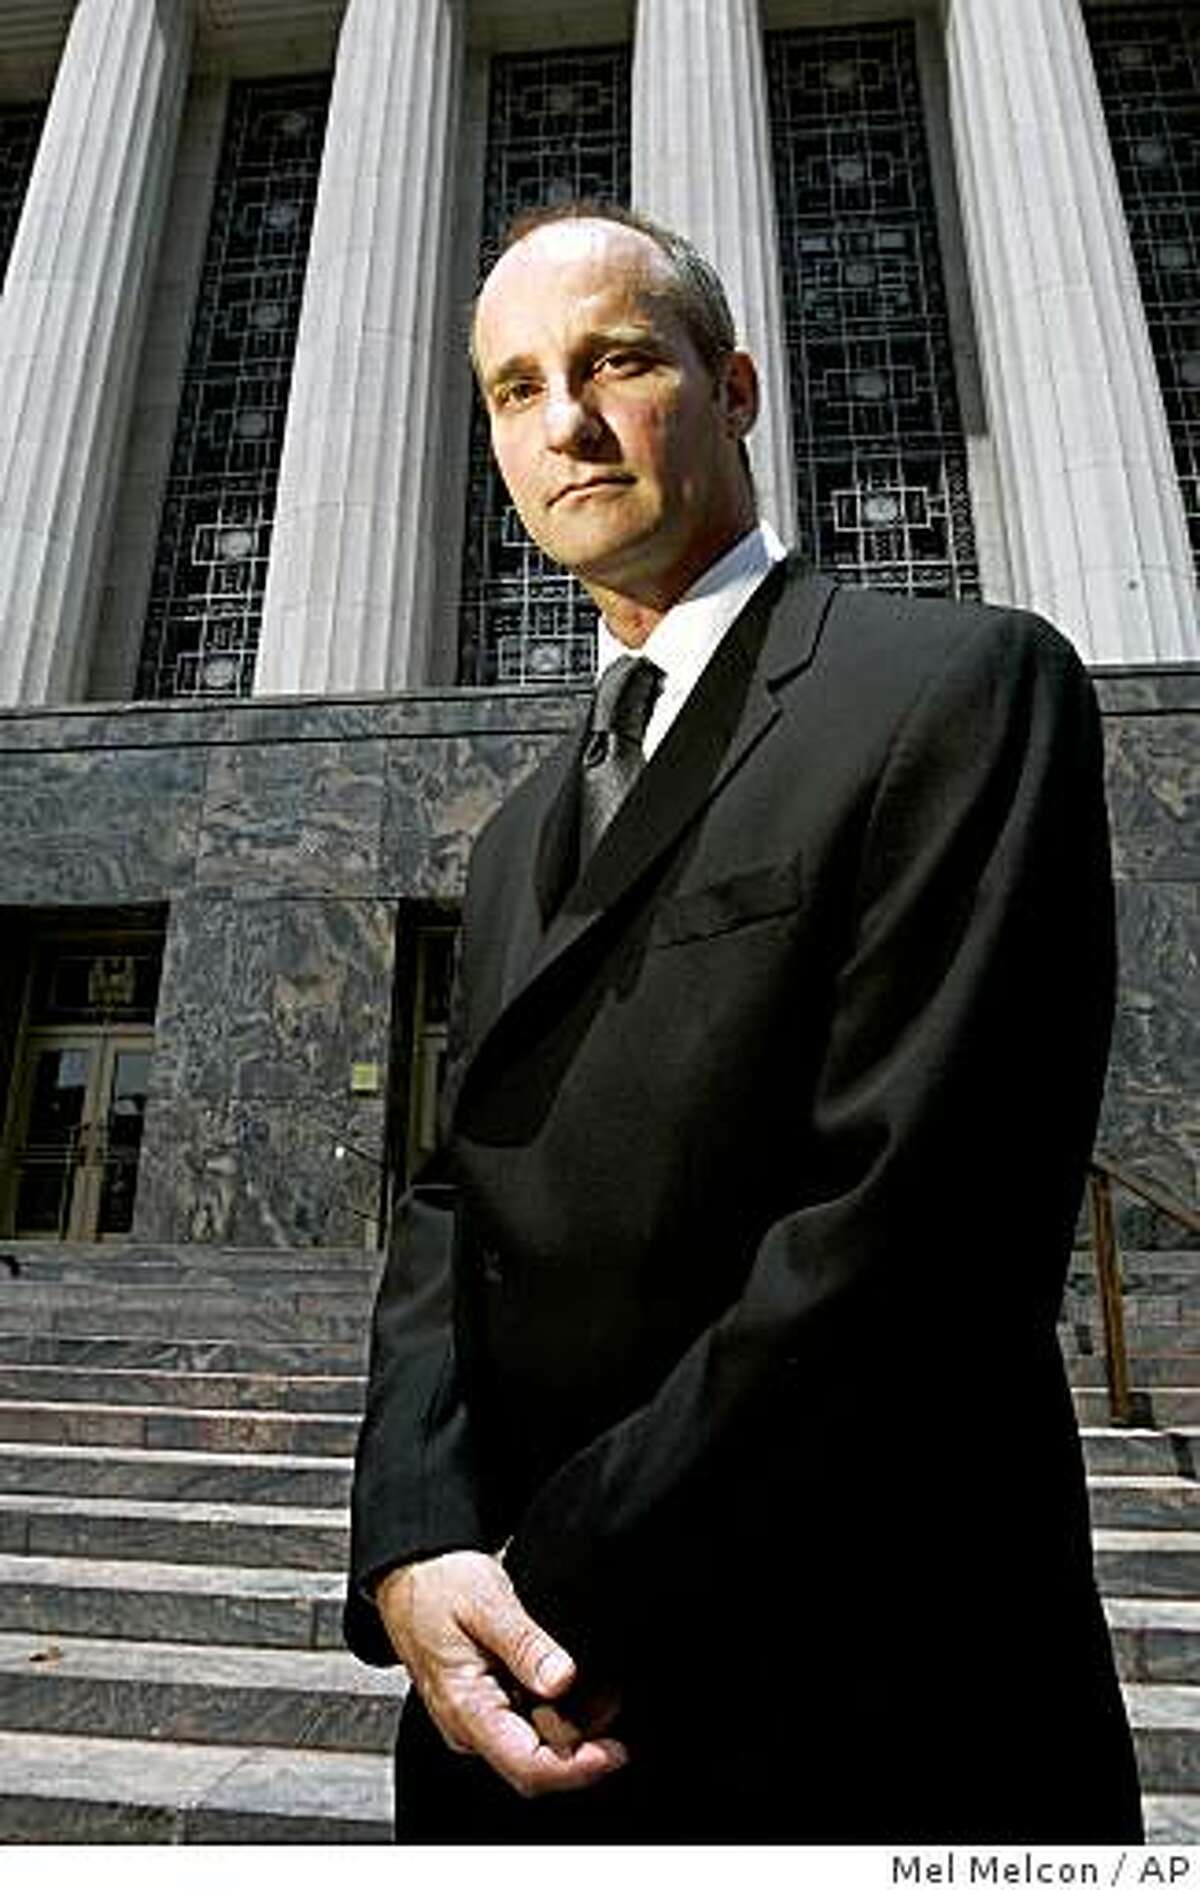 FILE - This July 25, 2008 photo shows Charles Lynch standing outside the U.S. Courthouse in Los Angeles. Lynch, a medical marijuana dispensary owner, is scheduled for sentencing Thursday, June 11, 2009 in one of the nation's first cases since the Obama administration modified its pot policy. (AP Photo/Los Angeles Times, Mel Melcon) ** MANDATORY CREDIT, NO SALES, NO FOREIGN, NO MAGS, NO TELEVISION ** LOS ANGELES DAILY NEWS OUT, ORANGE COUNTY REGISTER OUT, VENTURA COUNTY STAR OUT, INLAND VALLEY DAILY BULLETIN OUT, SAN BERNARDINO SUN OUT, LA OPINION OUT **